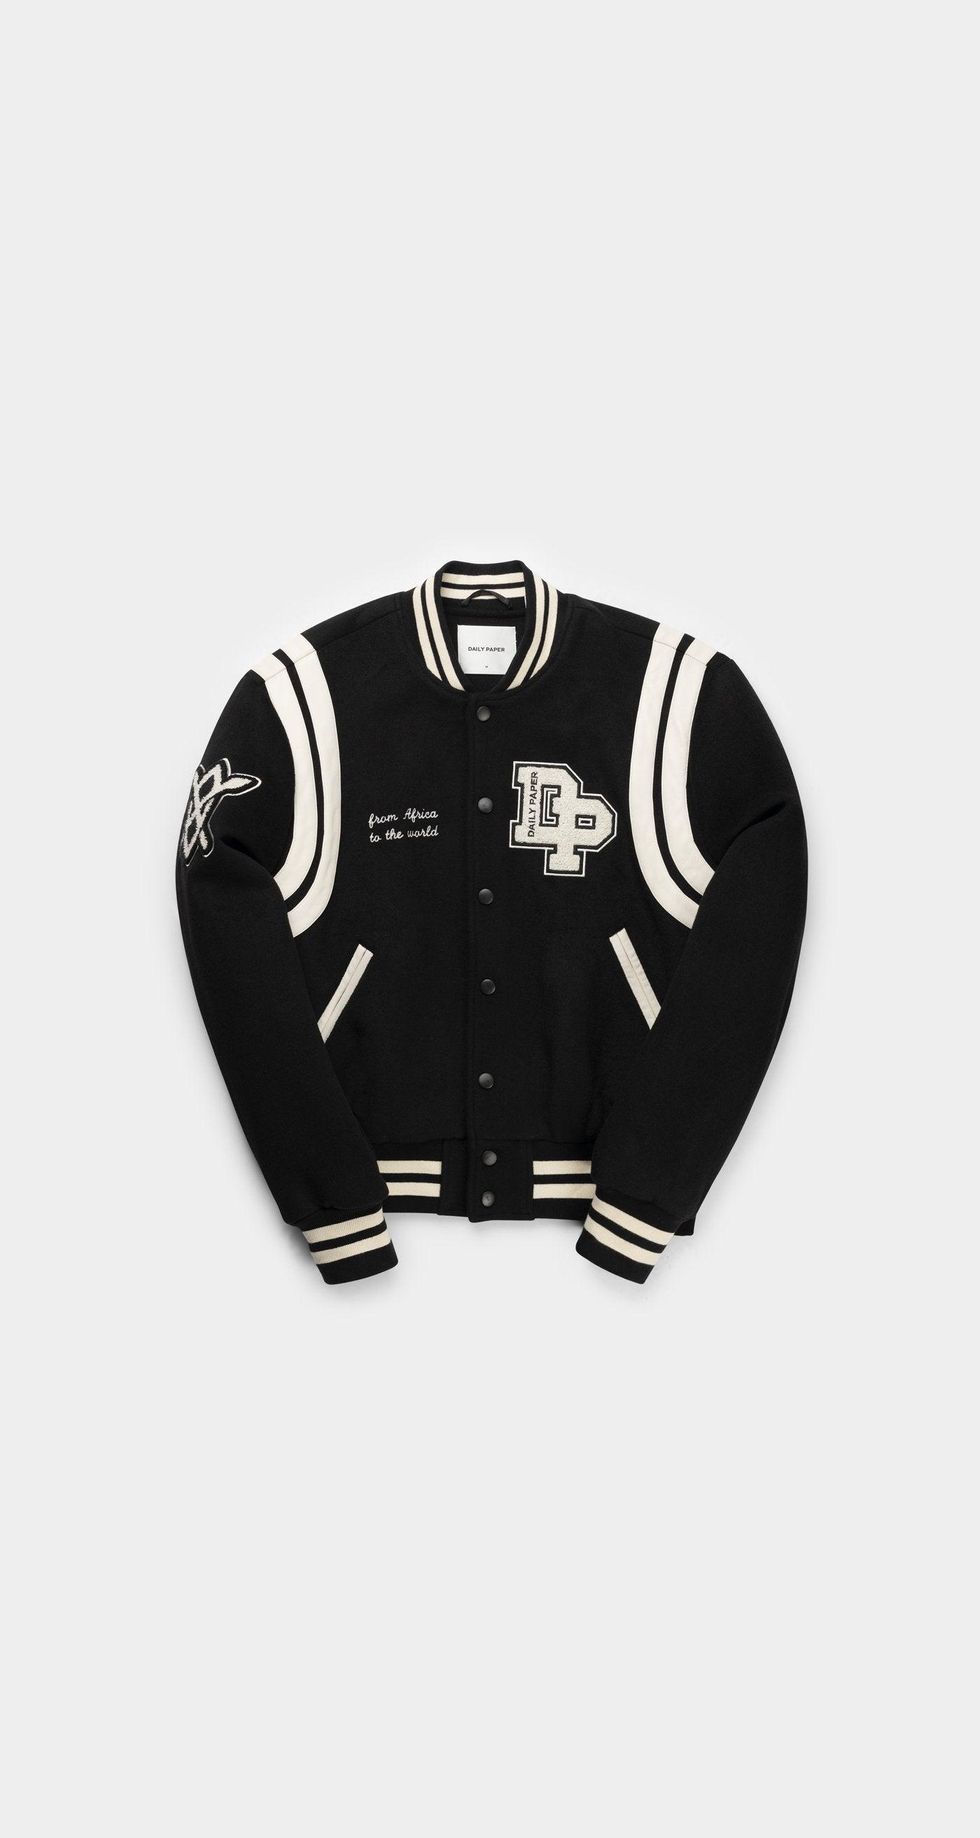 Why the Varsity Jacket Is a Recent Fashion Favorite - Coveteur